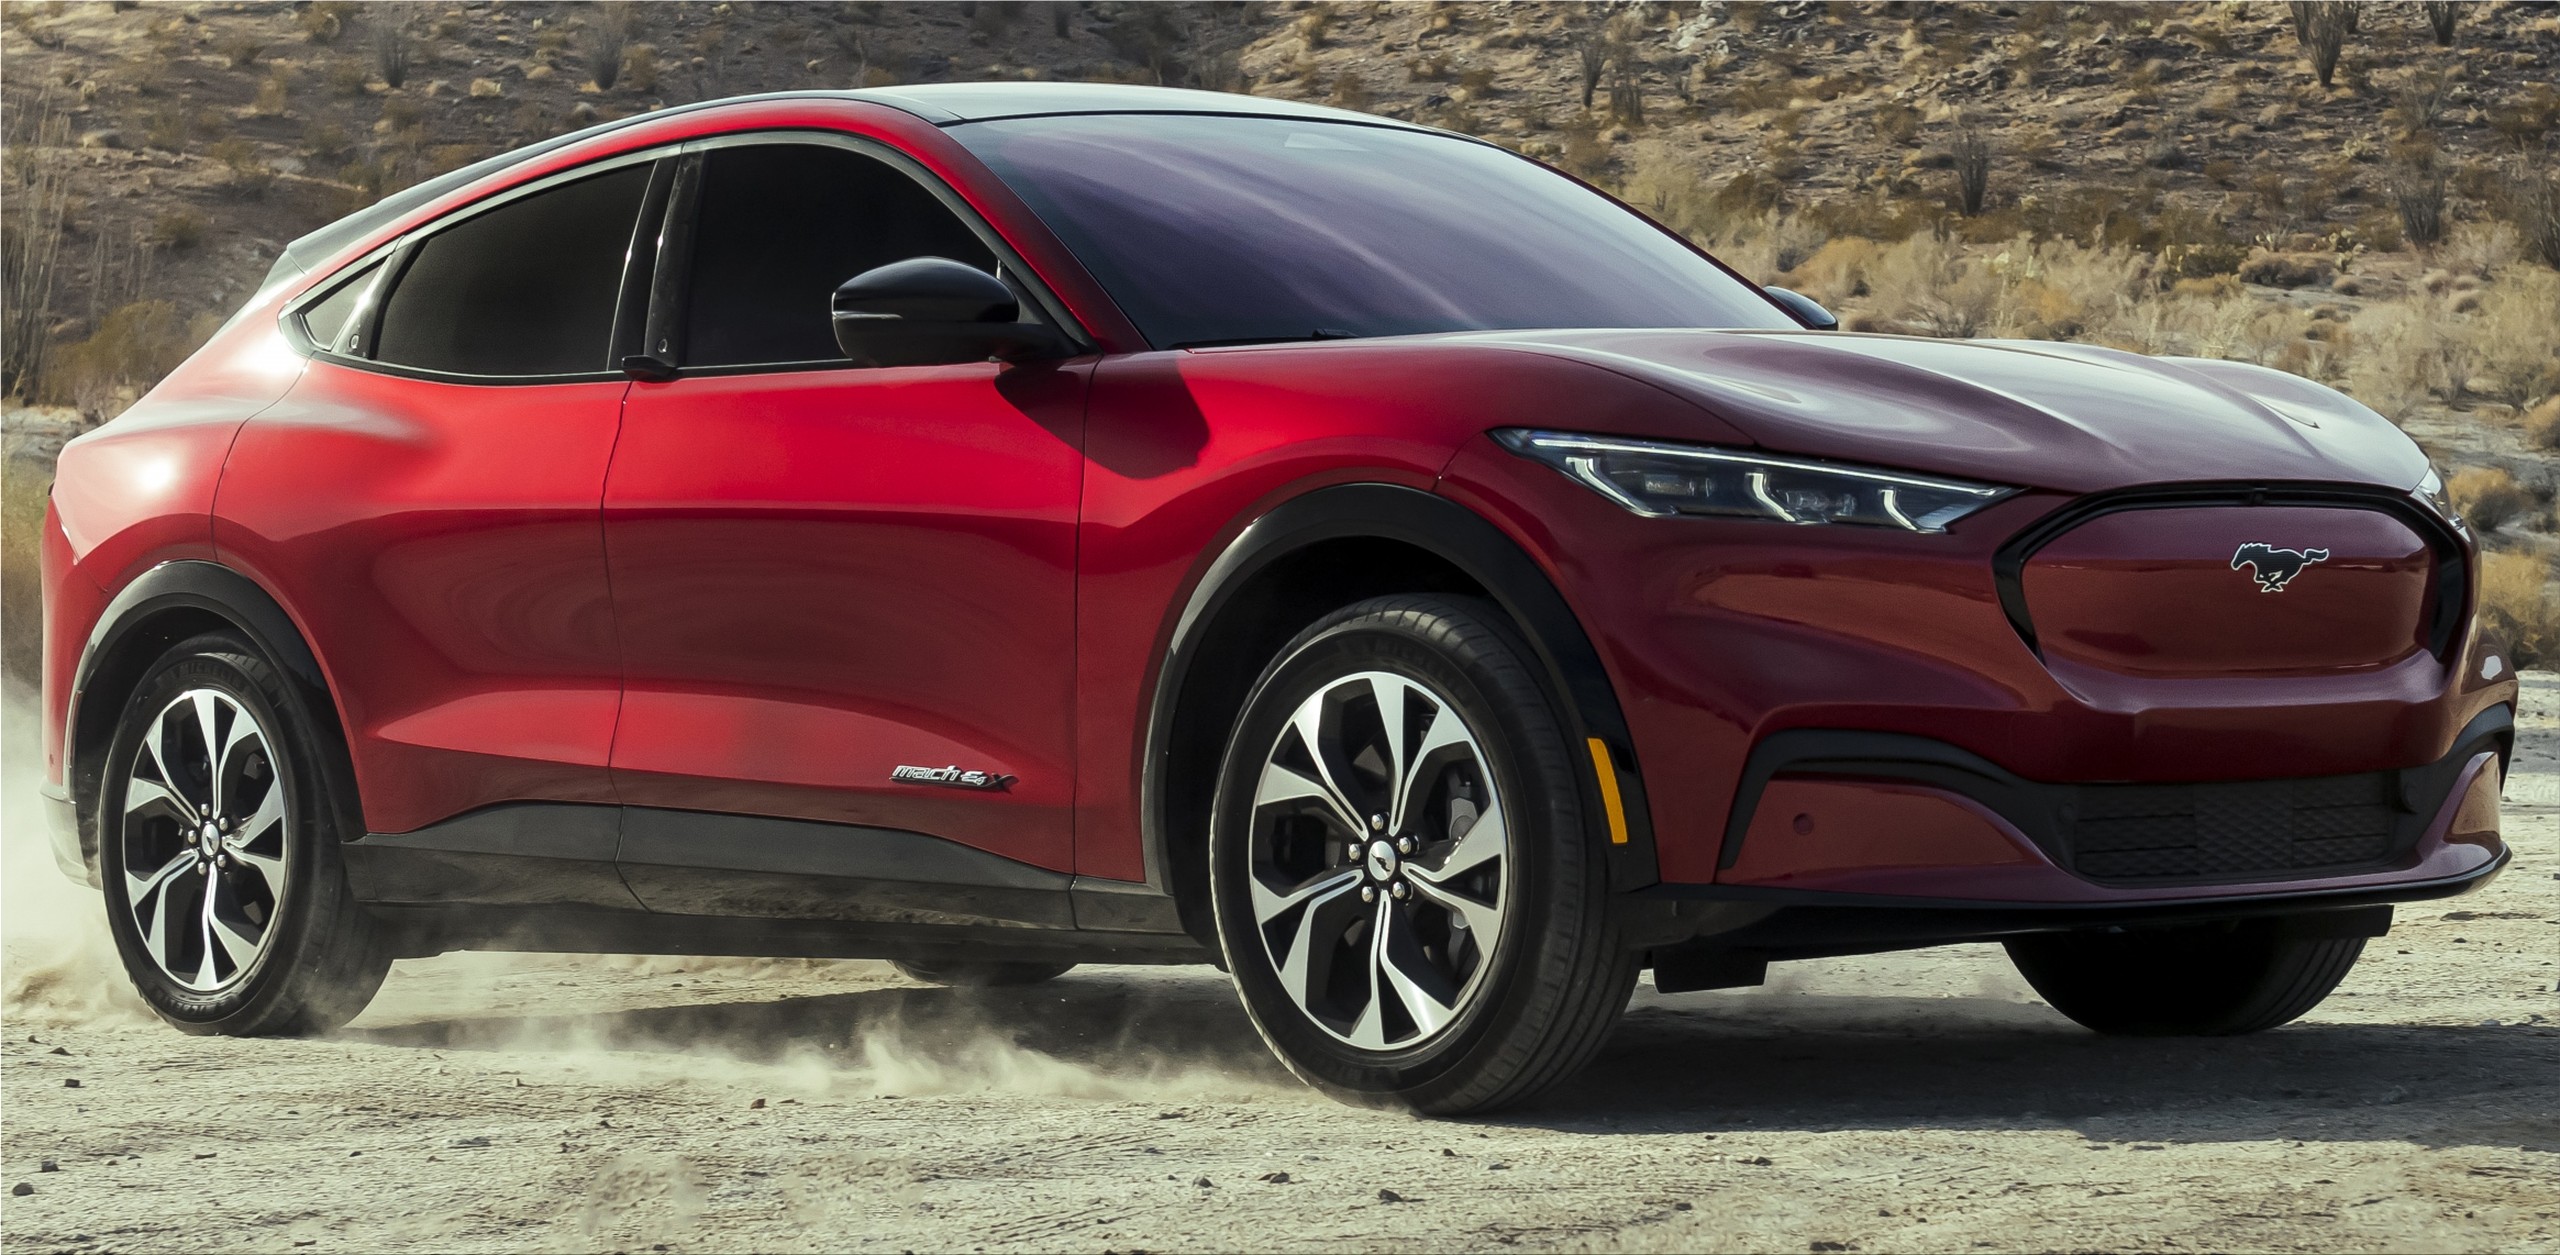 Eight facts you need to know about the Ford Mustang Mach-E electric SUV ...